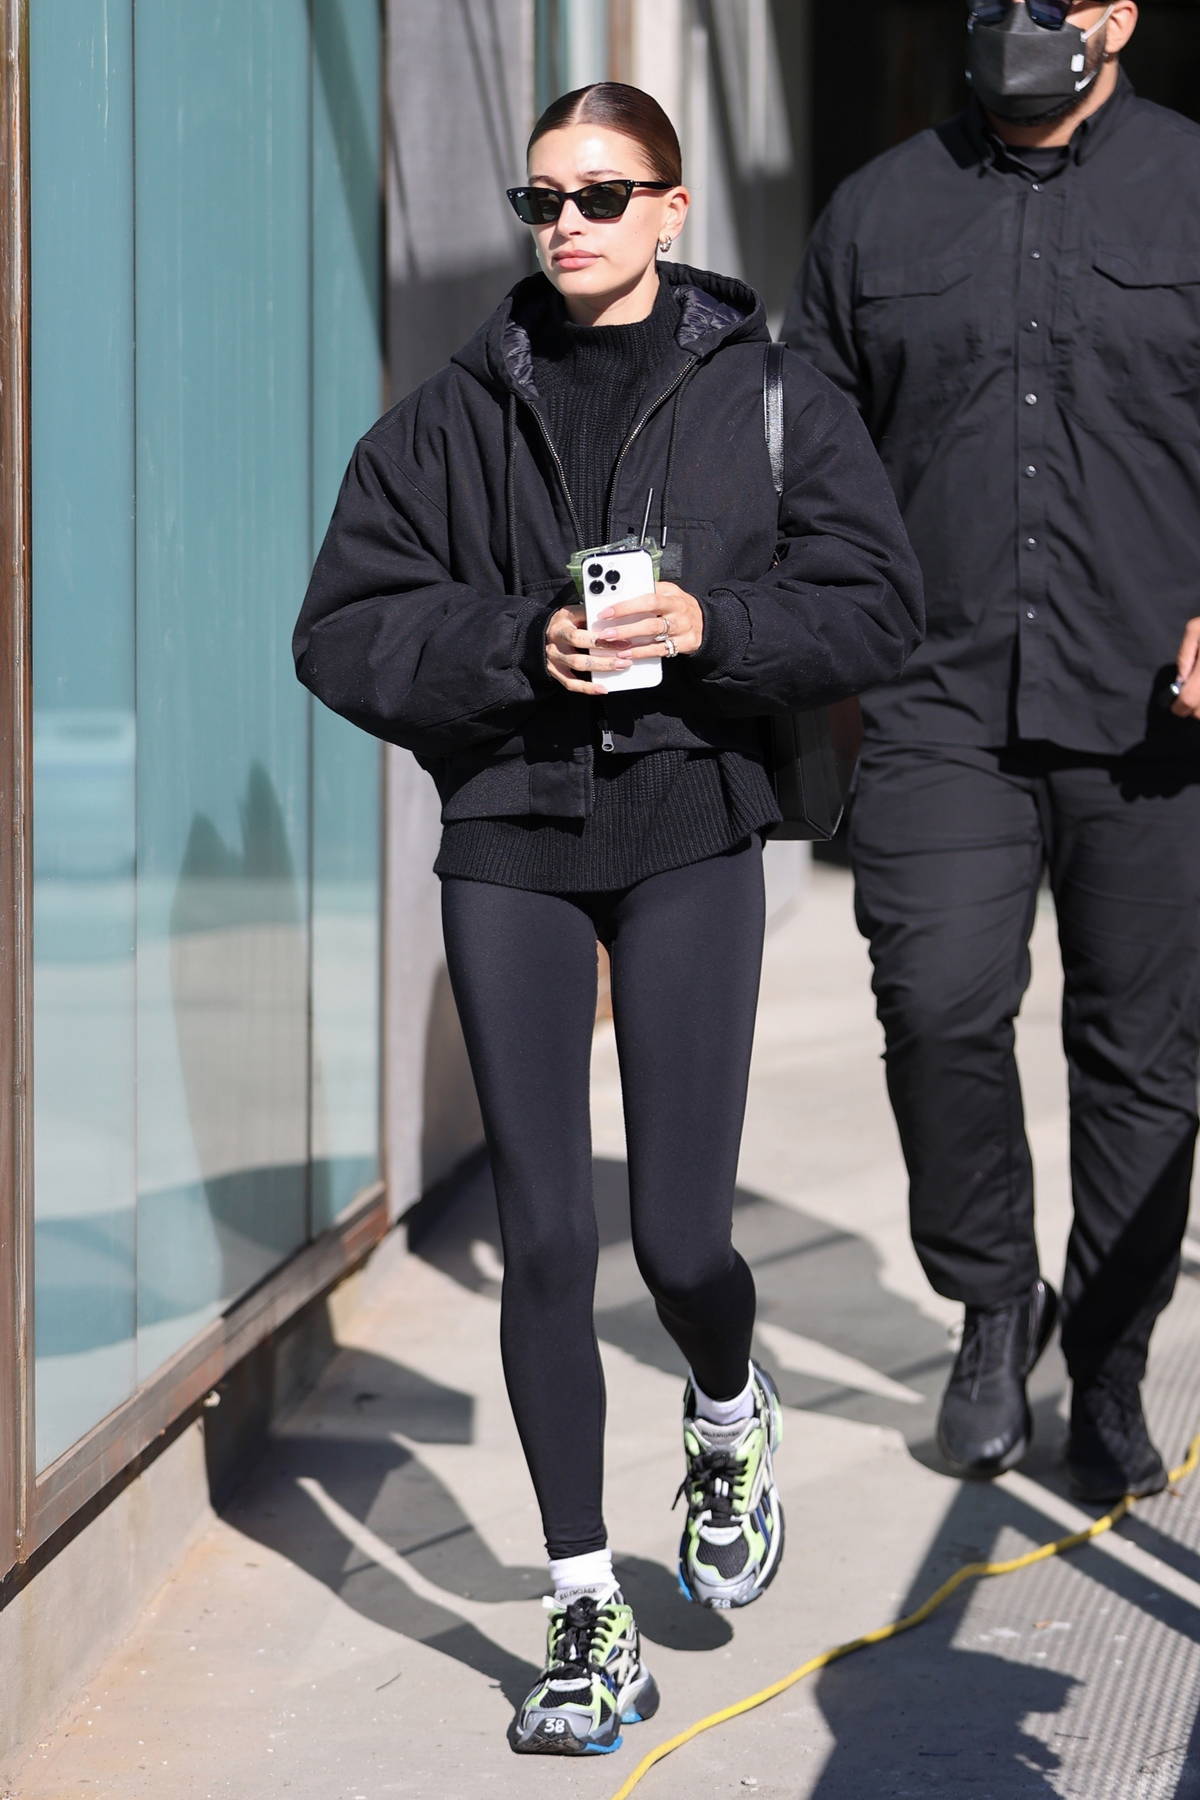 sara sampaio flashes her abs in cropped sweatshirt and leggings